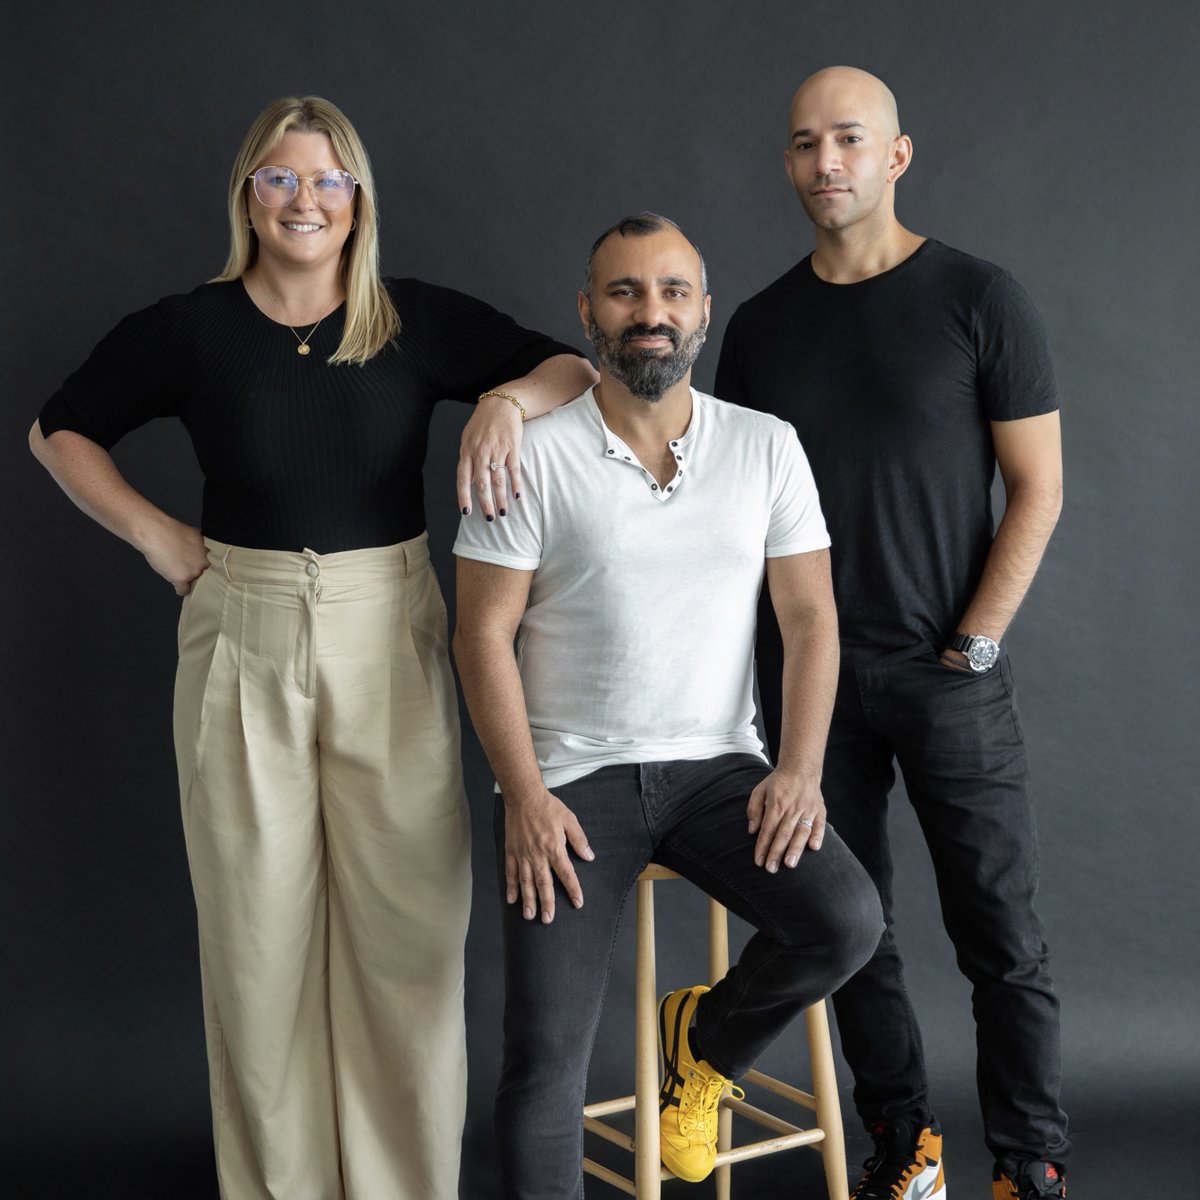 Announcing Audacious 2.0 Excited to announce @AudaciousHQ's second fund, a $150M fund dedicated to backing the most ambitious founders in the world at the earliest stages of their journey. A bit more on us in the thread below. cc @mzaveri @TheRecruiterSam